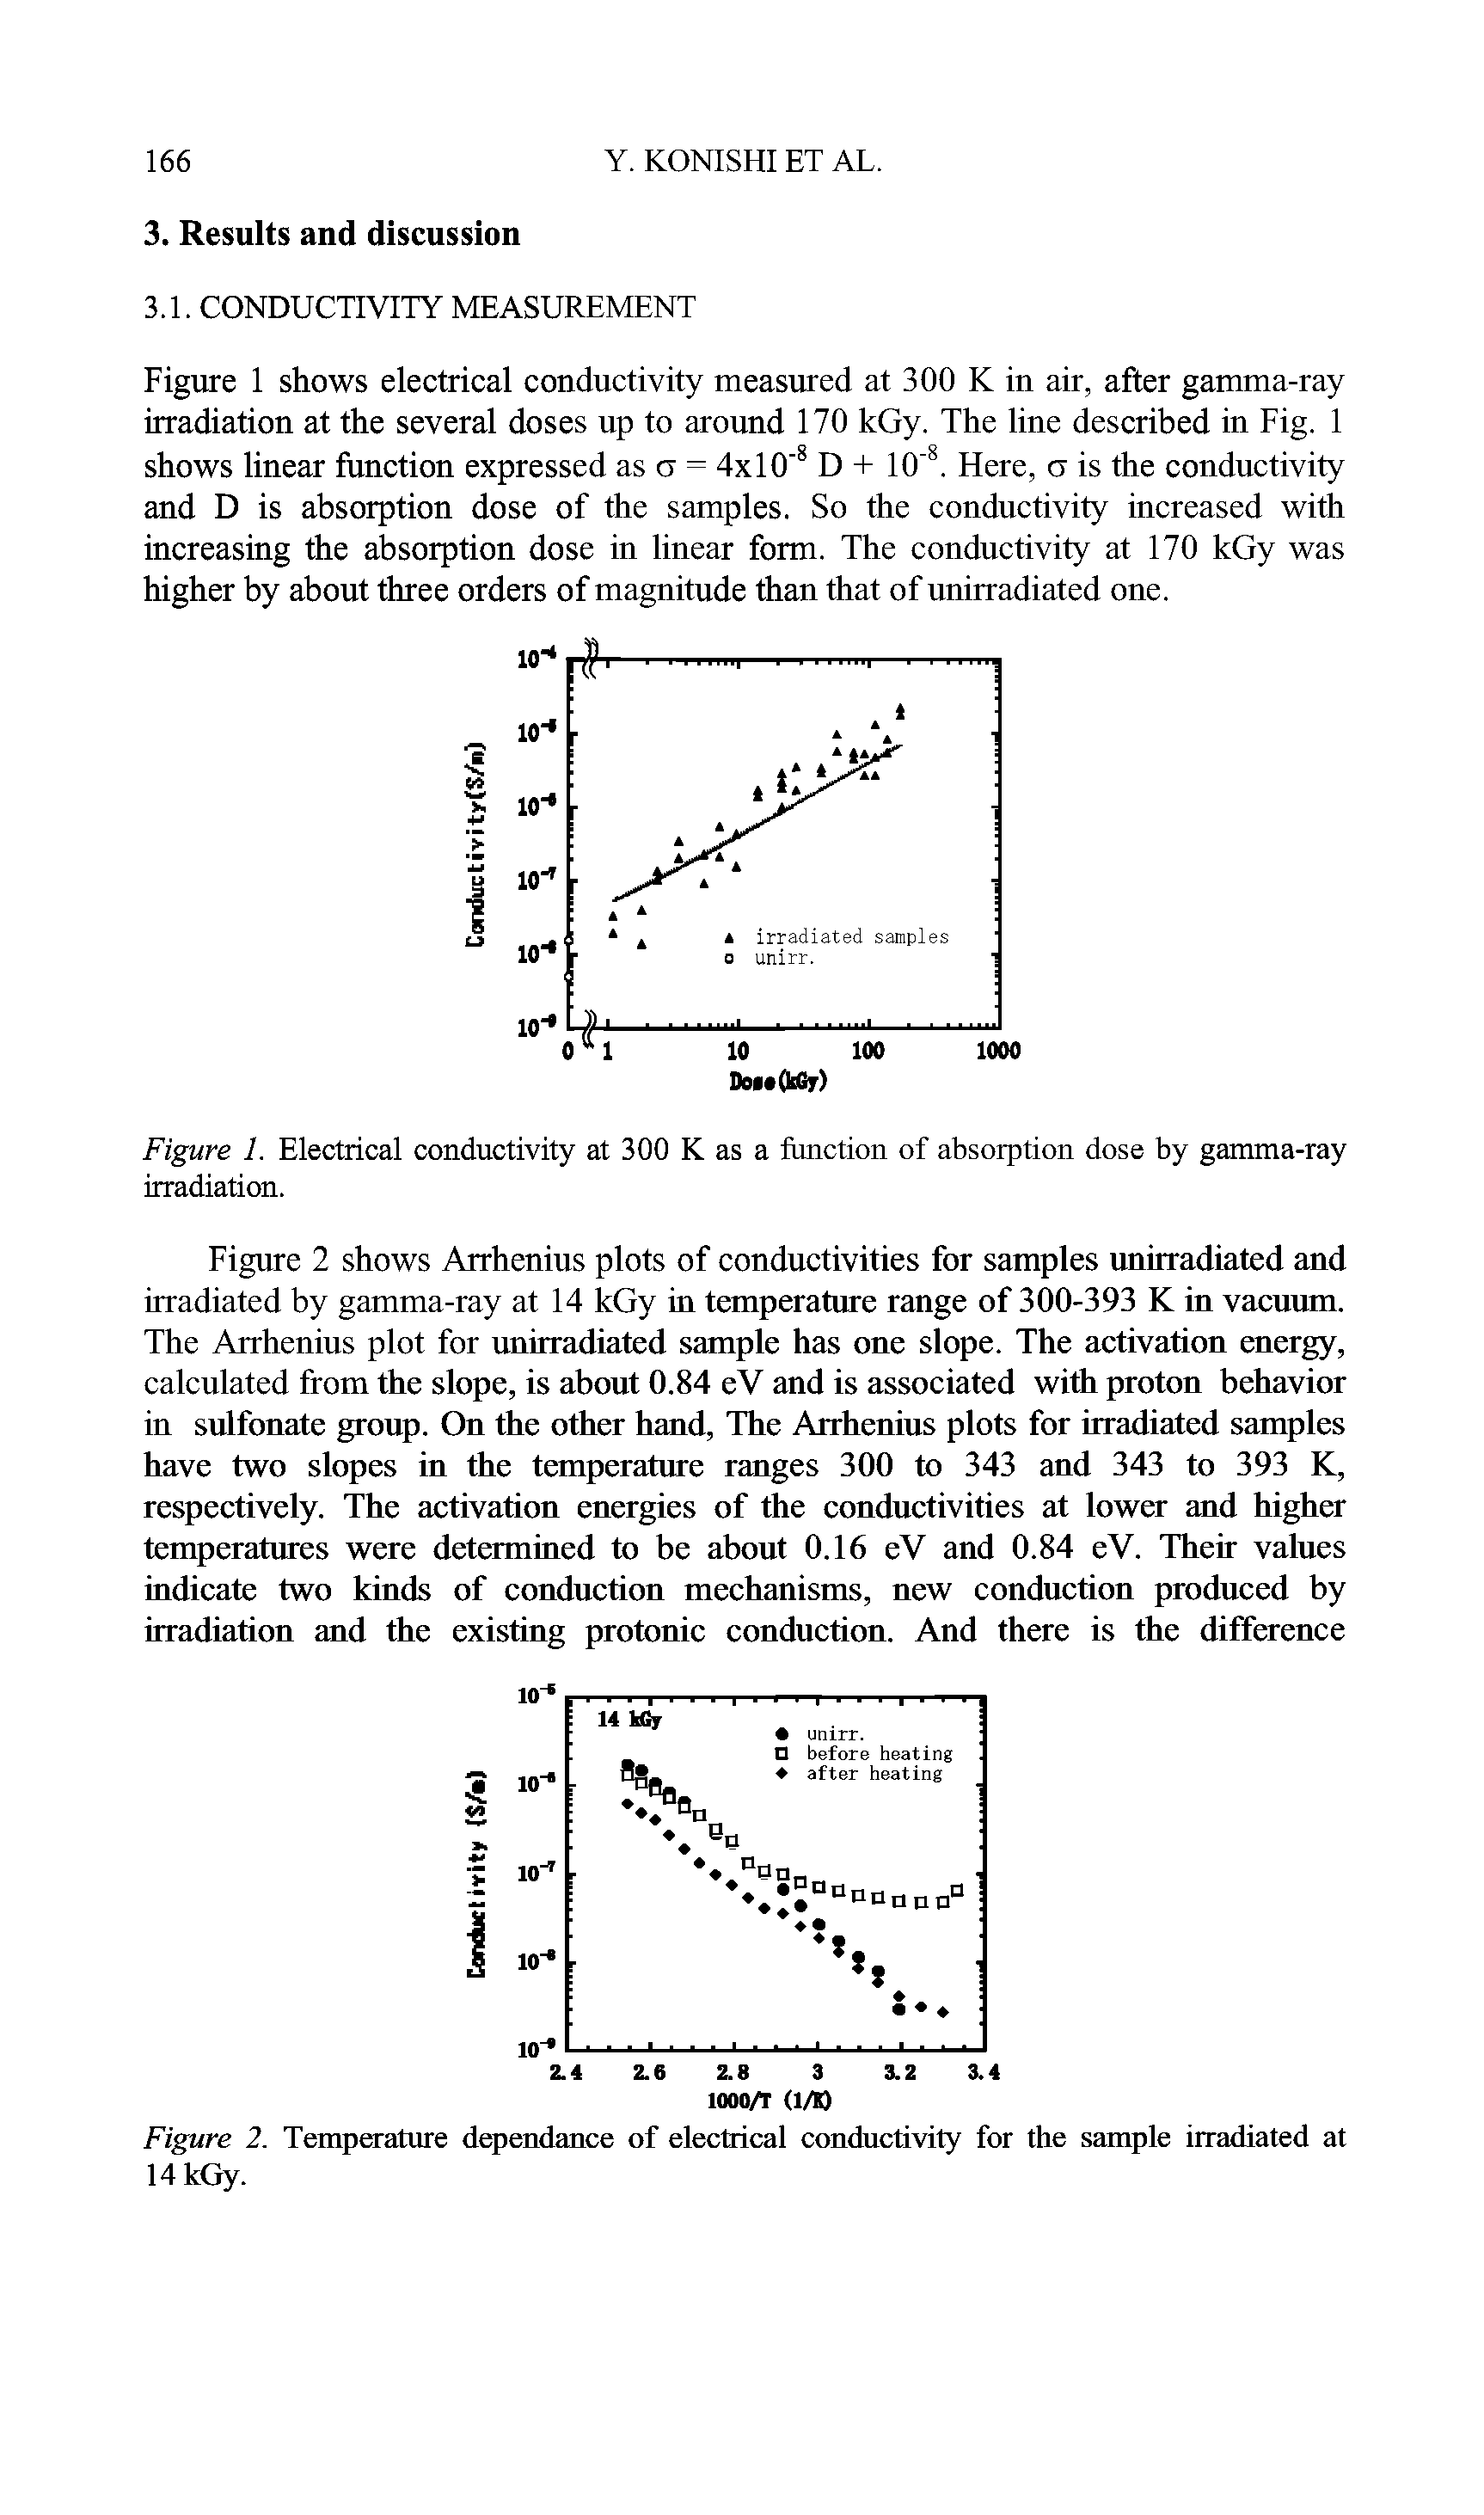 Figure 2. Temperature dependance of electrical conductivity for the sample irradiated at 14 kGy.